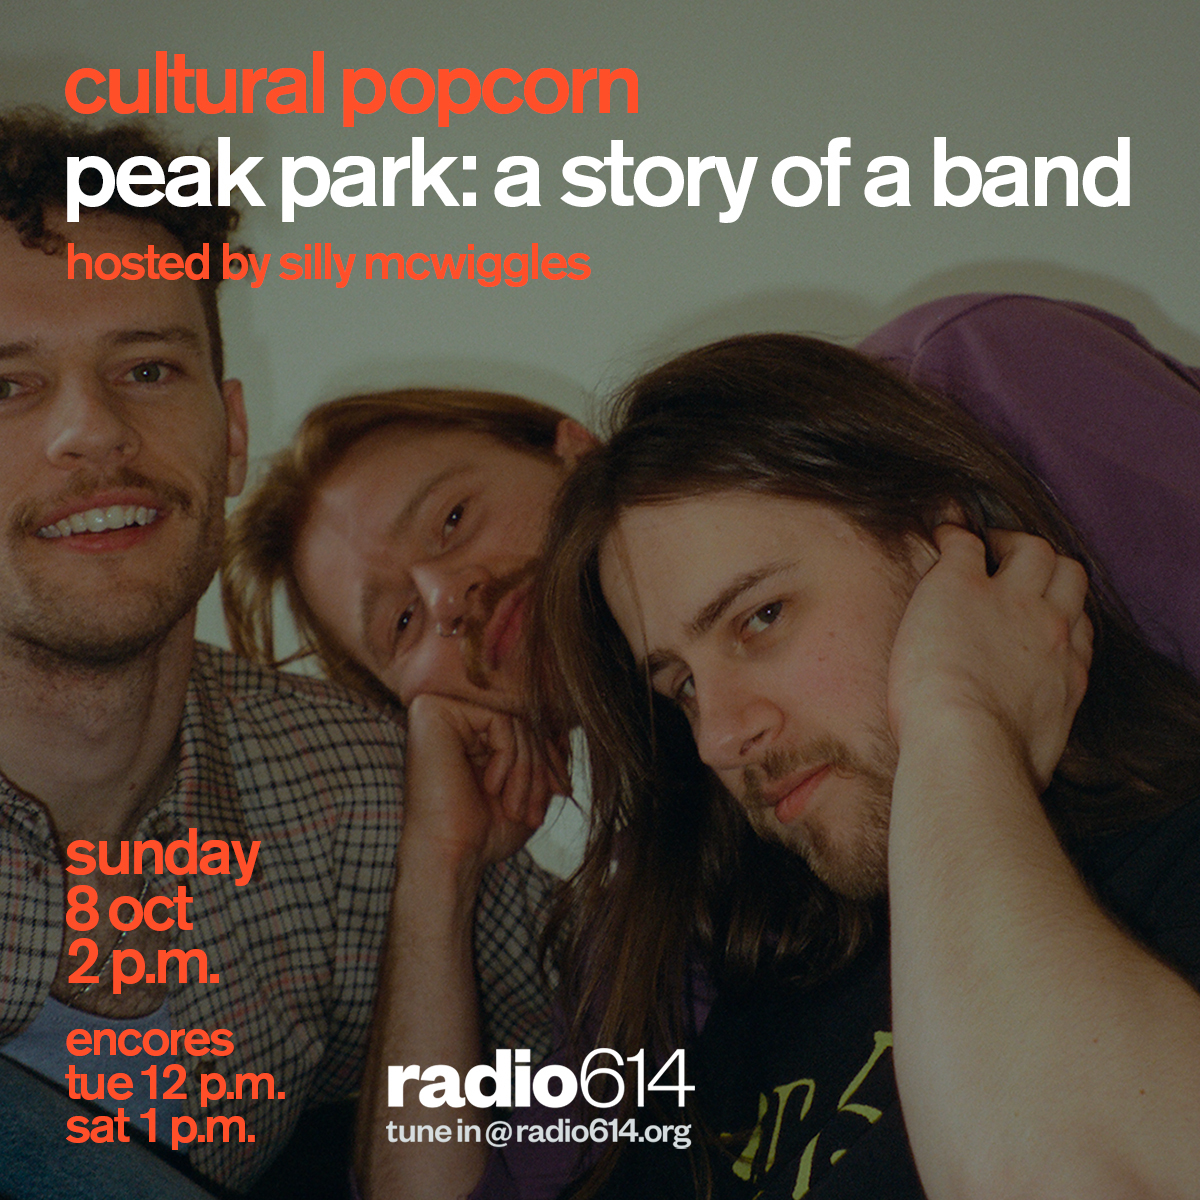 Catch our Tuesday encore of @SillyMcWiggles hosting a Cultural Popcorn special feature 'Peak Park: A Story of a Band'  12-2pm EST (5-7pm UK)
@radio614▶️ radio614.org